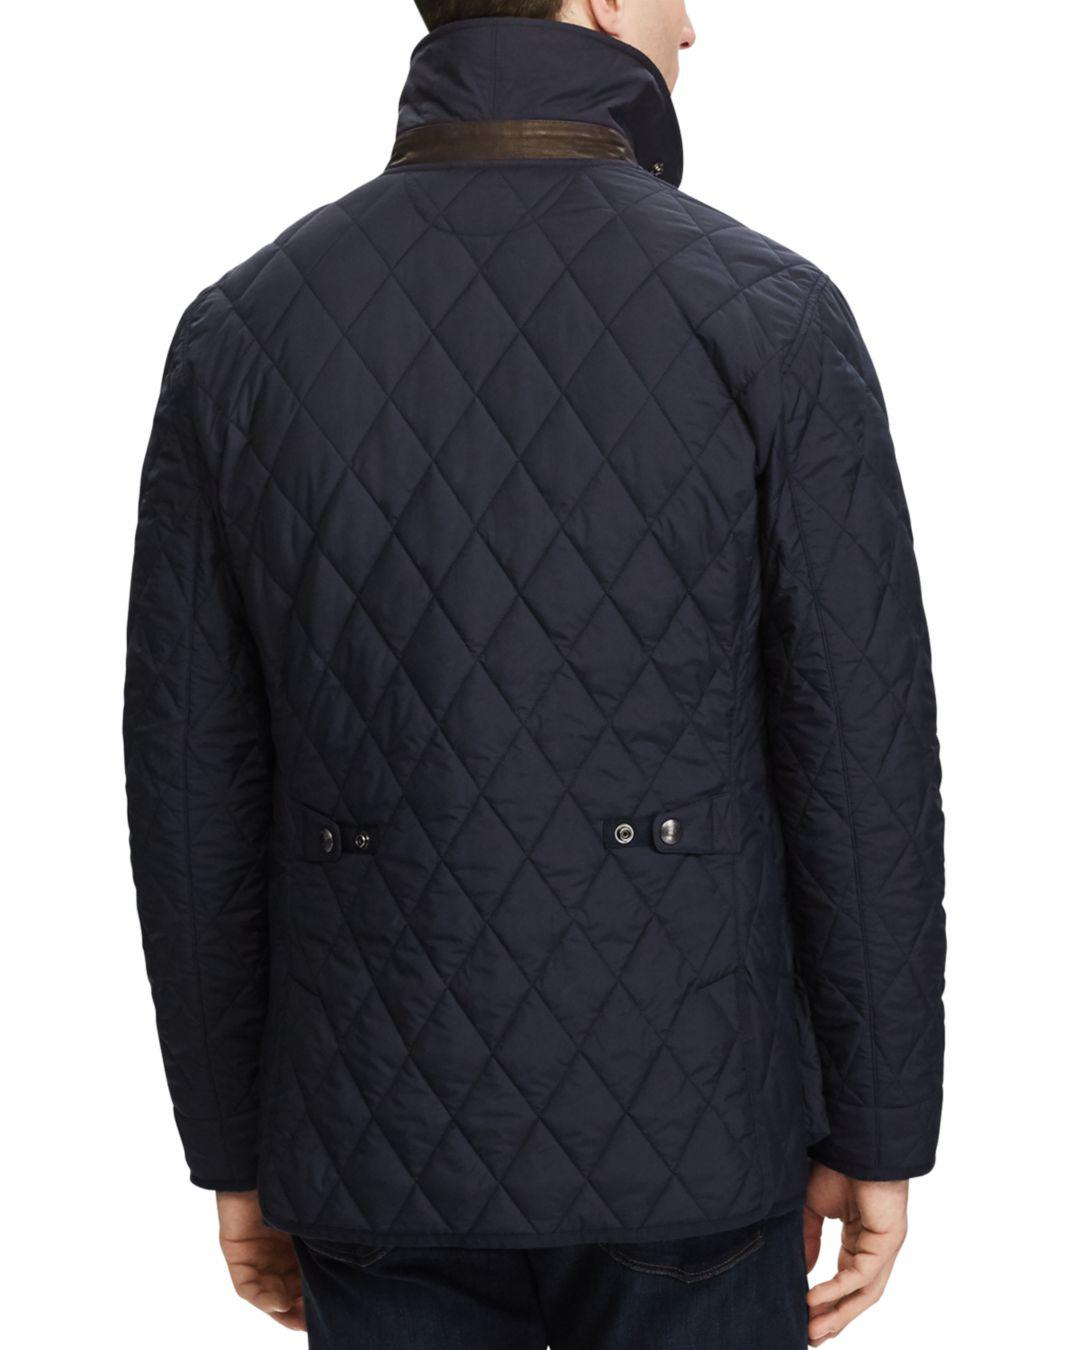 Polo Ralph Lauren Iconic Quilted Car Coat in Blue for Men - Lyst